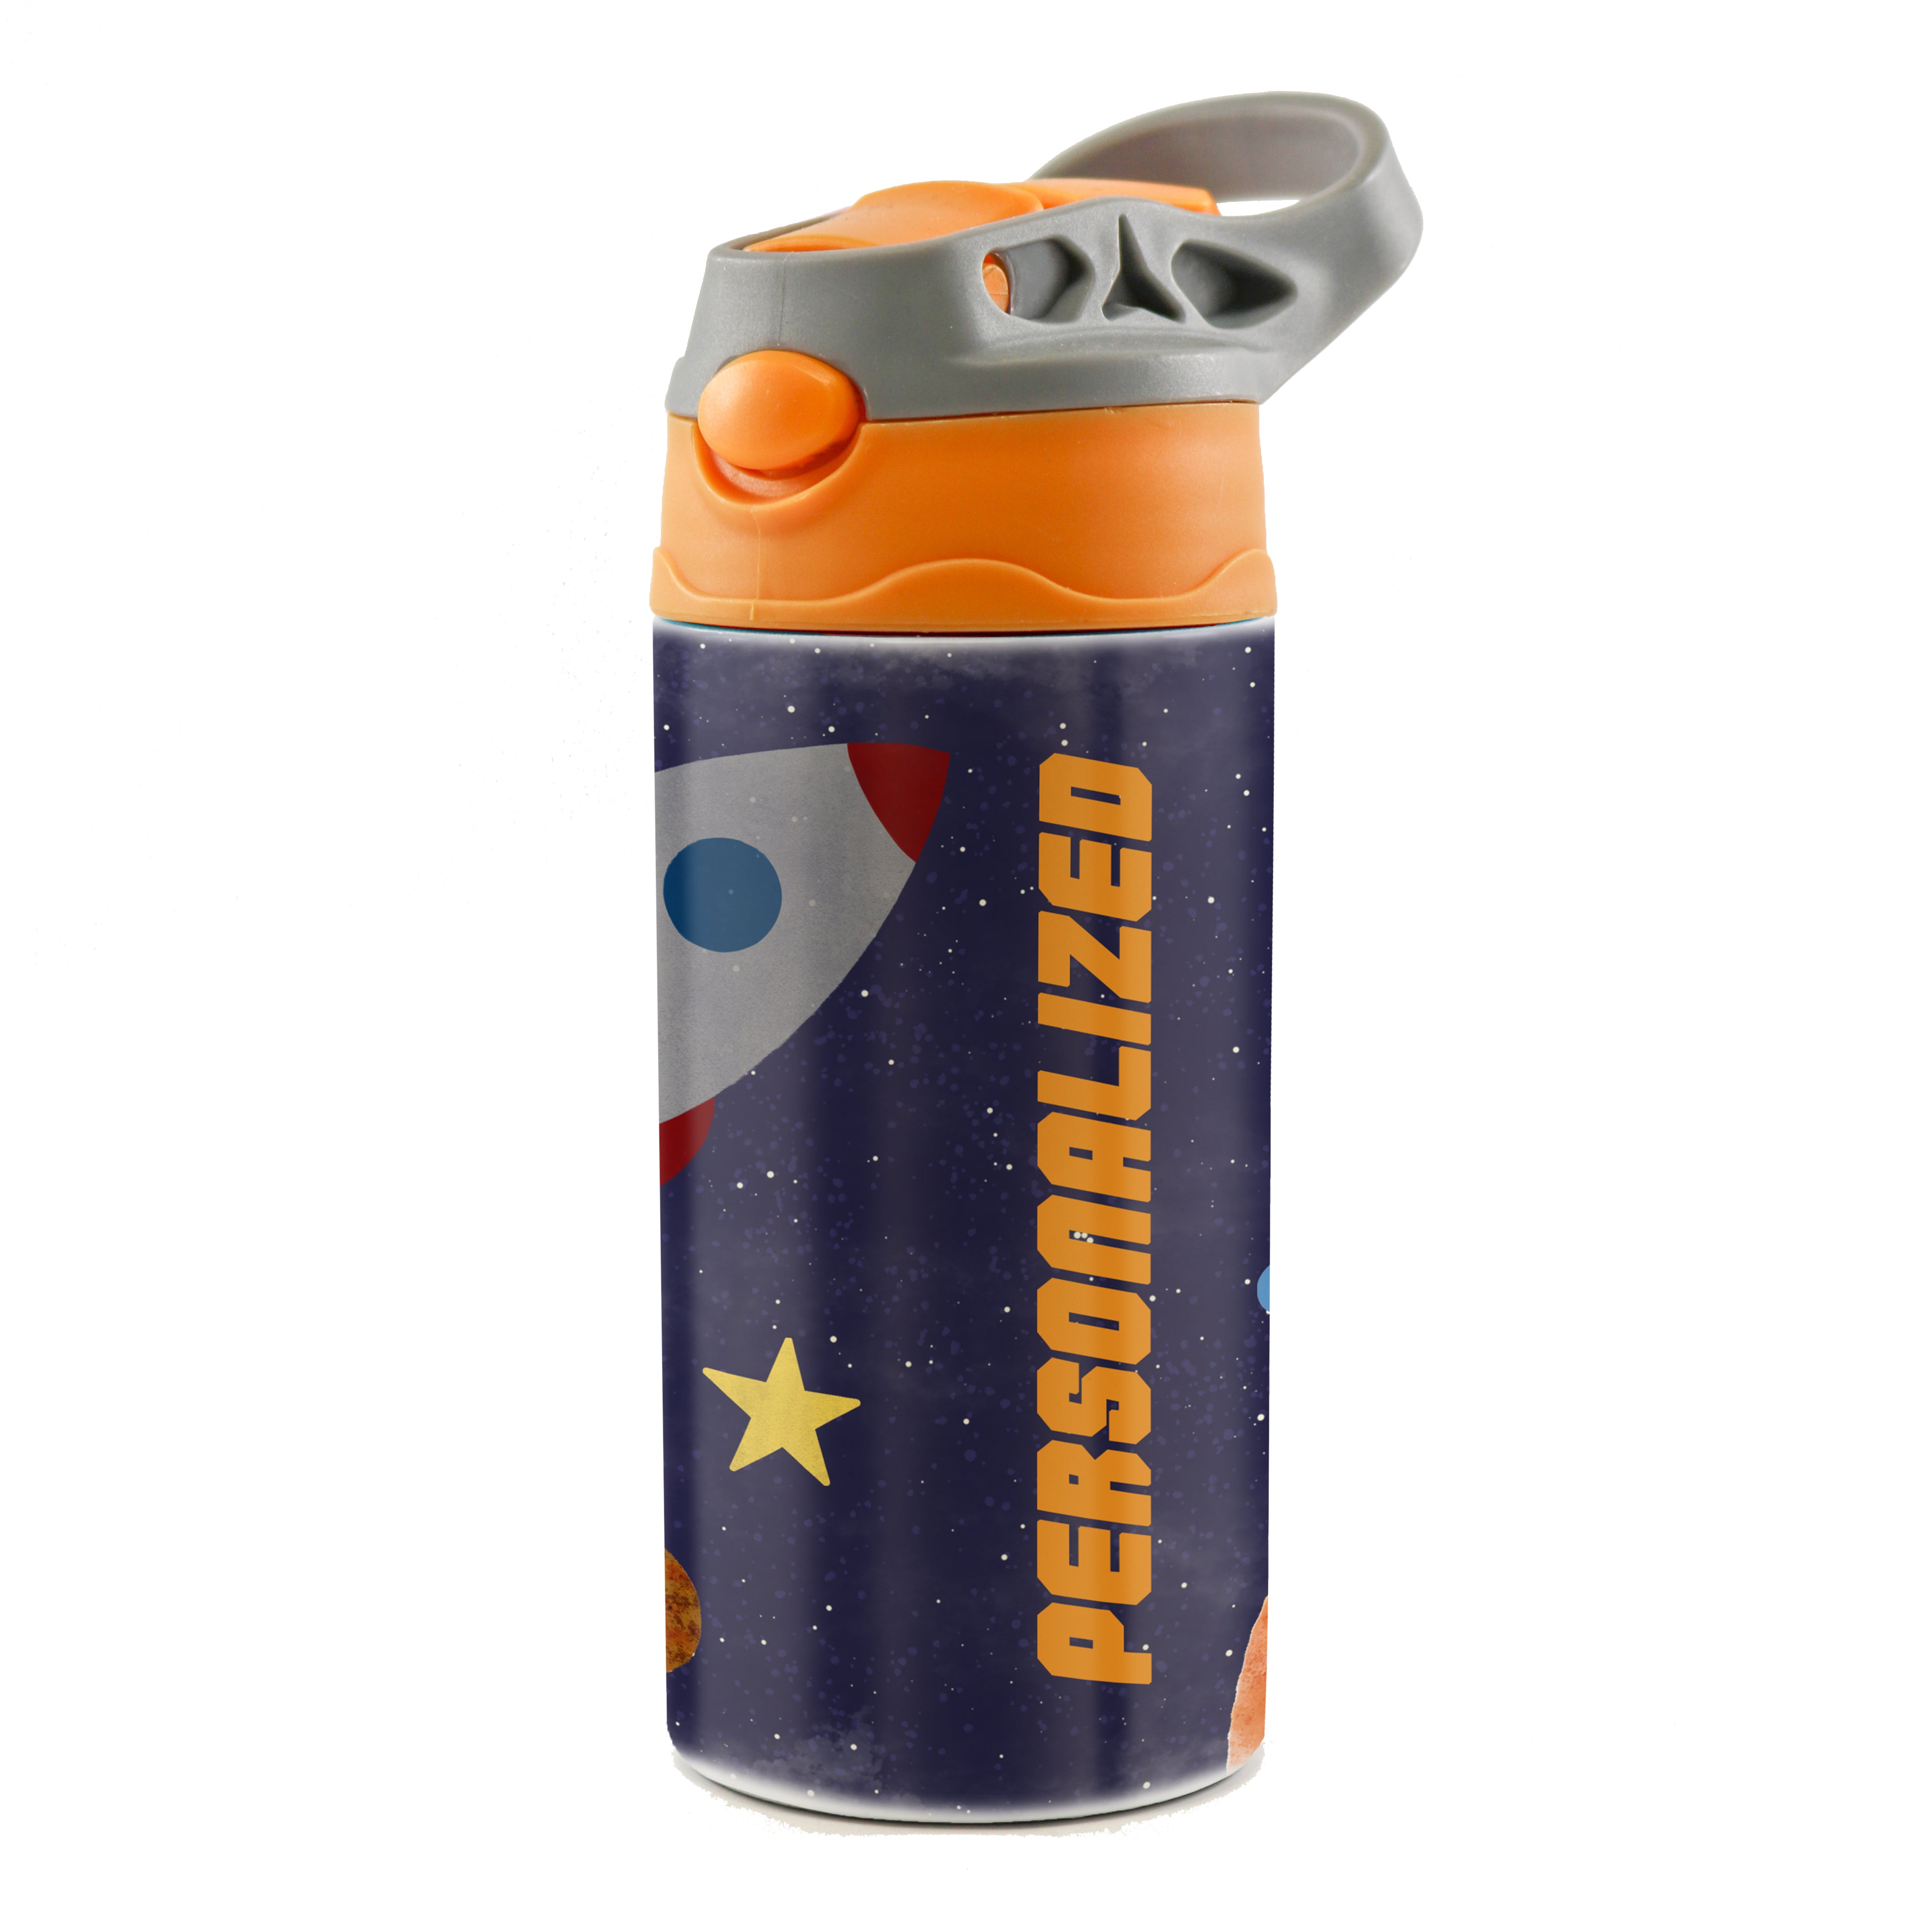 Trend Setters Original (Astronaut - Personalize with Name) 12 oz Stainless Steel Water Bottle with Orange and Grey Lid